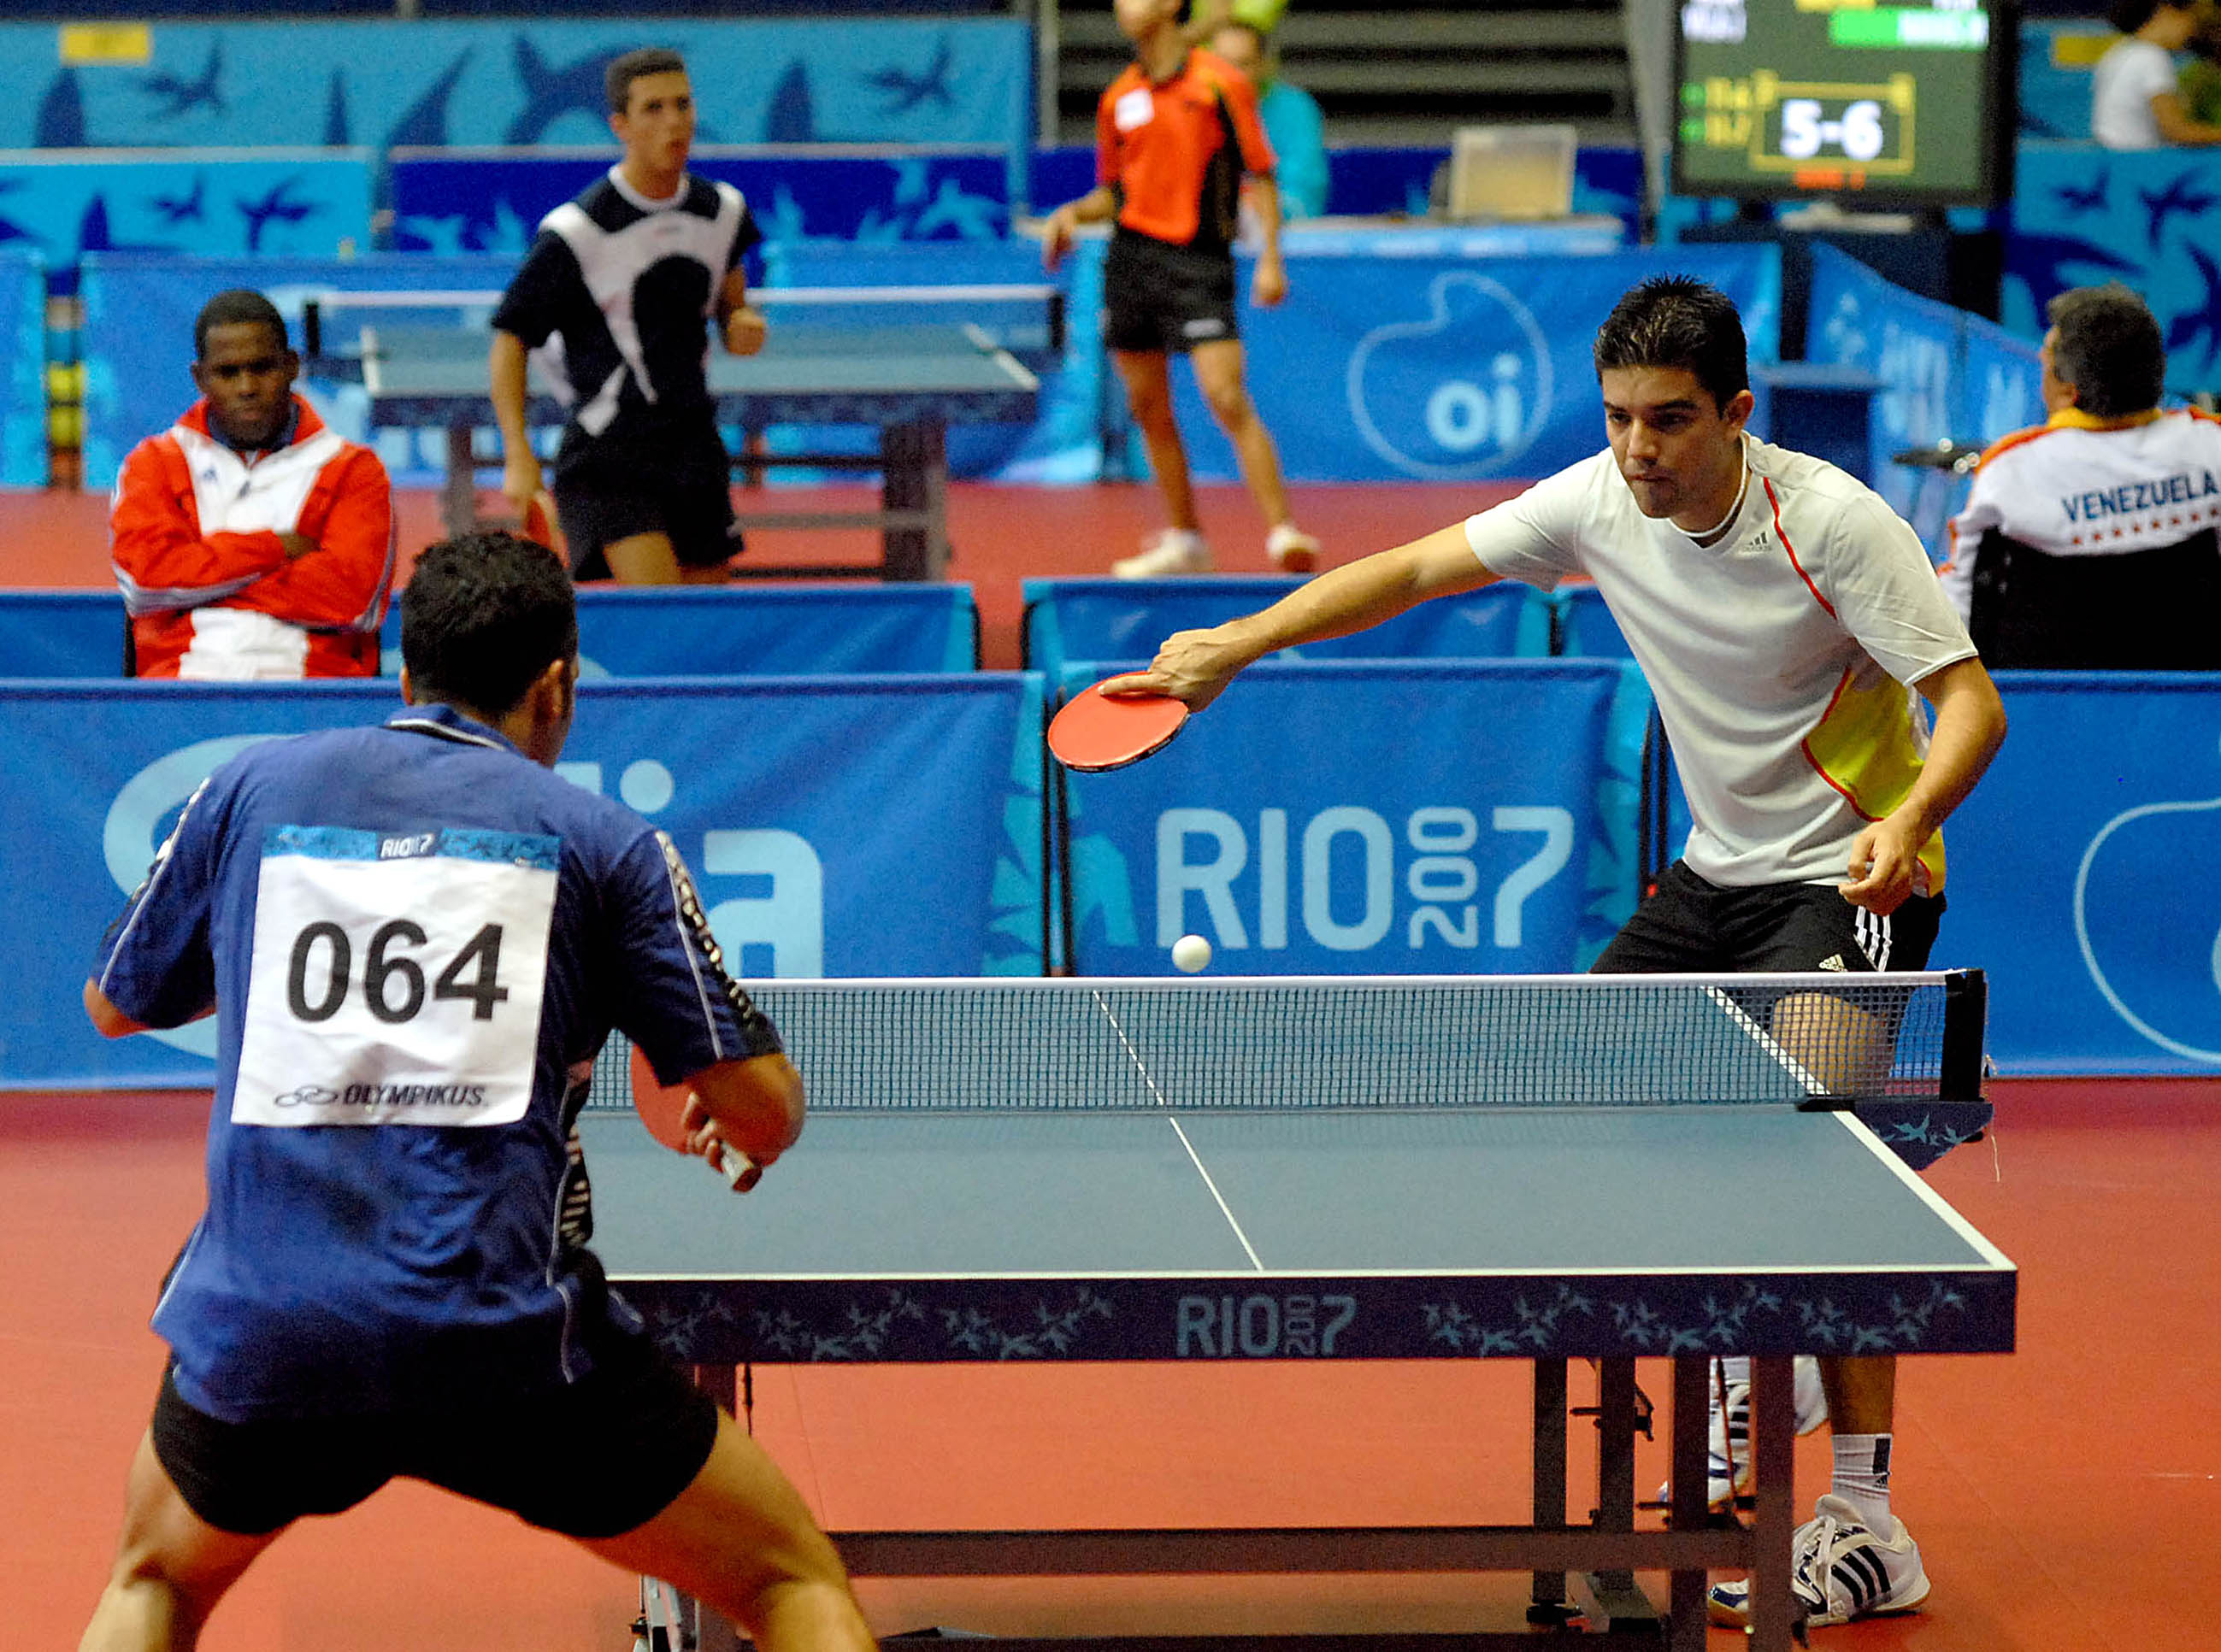 Asian Games India win their first ever Table Tennis medal at Asian showpiece